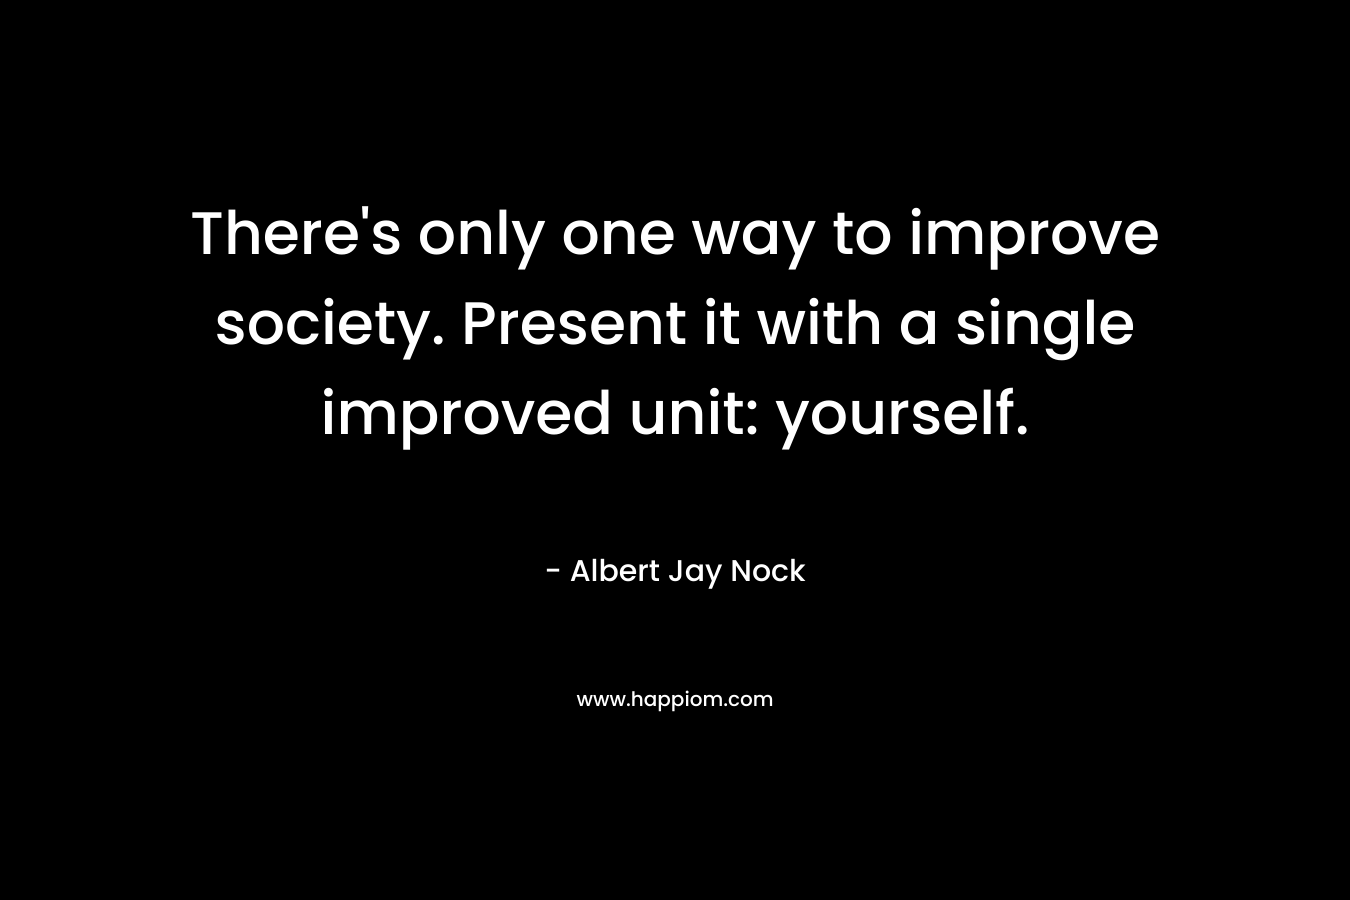 There's only one way to improve society. Present it with a single improved unit: yourself.